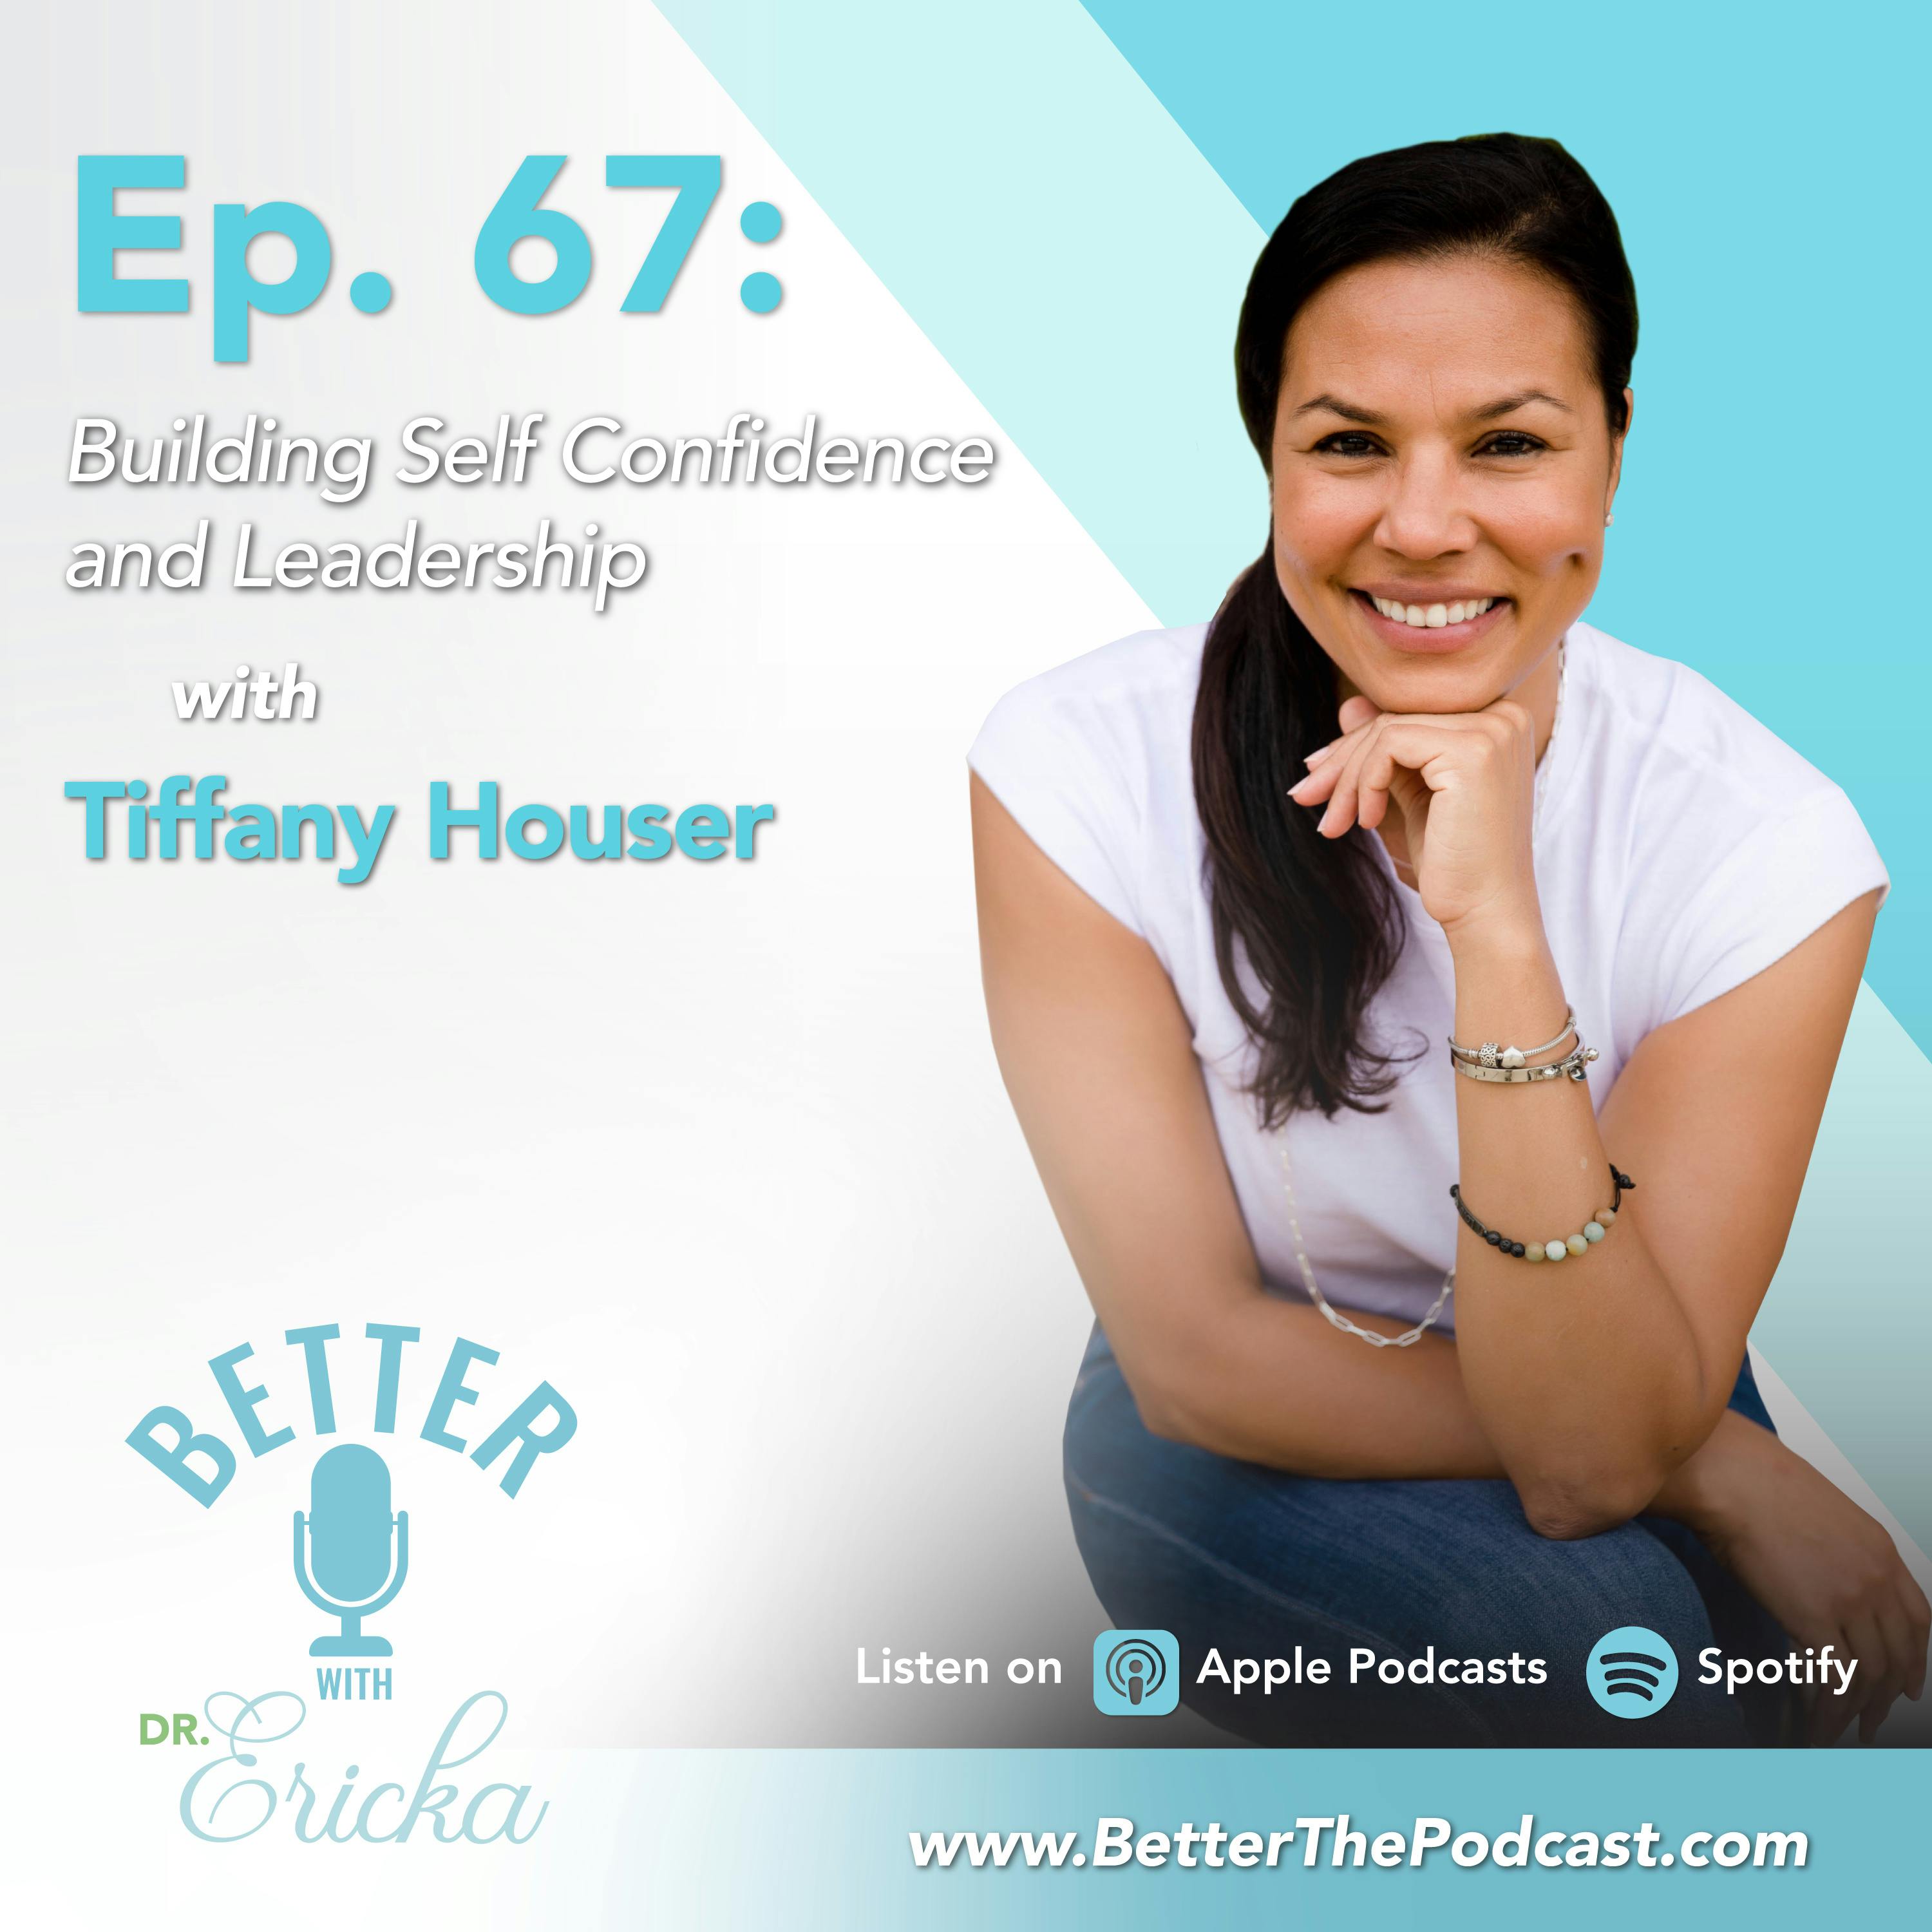 Building Self-Confidence and Leadership with Tiffany Houser